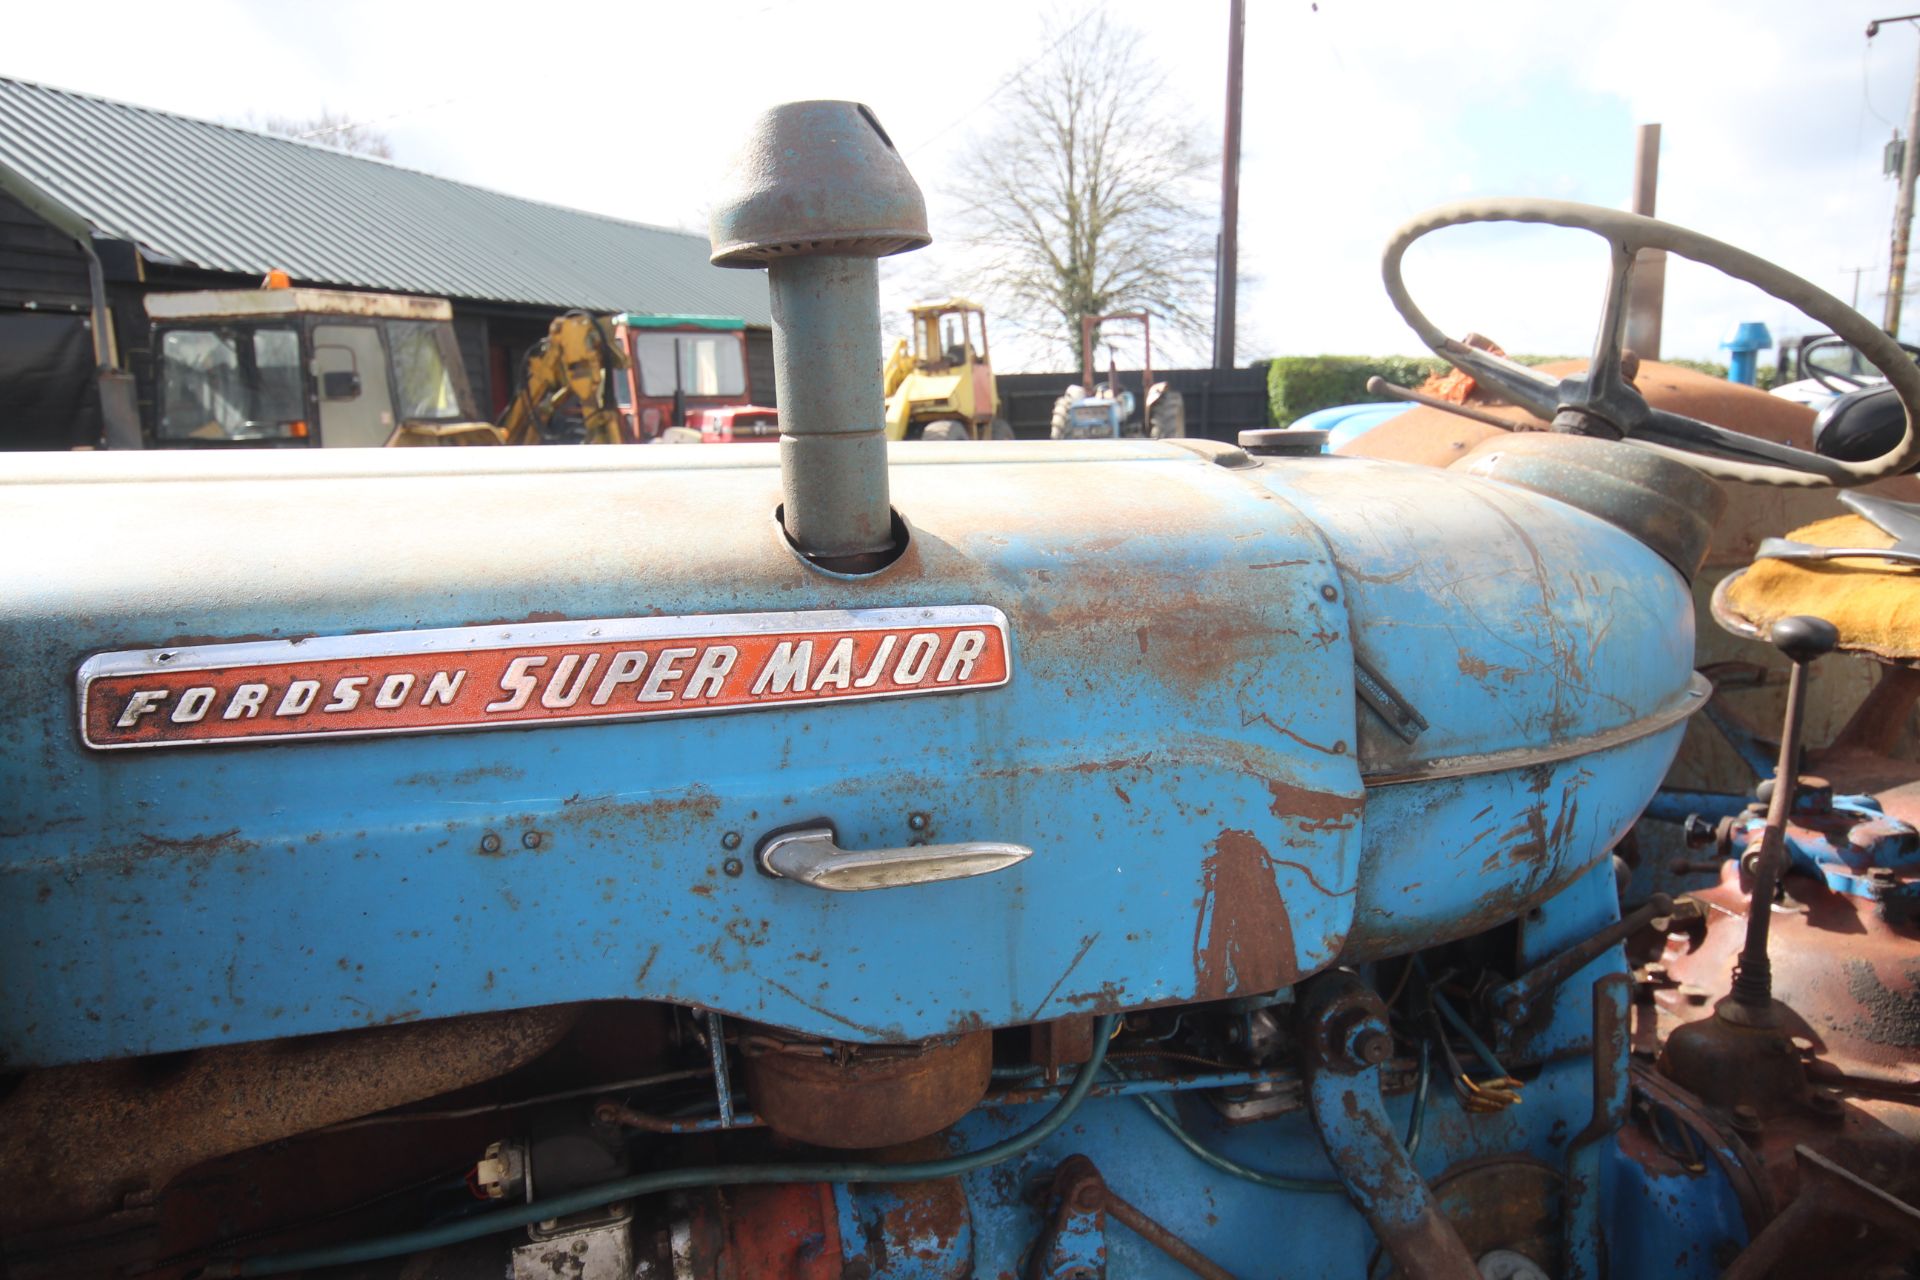 Fordson Super Major 2WD tractor. Key held. - Image 12 of 47